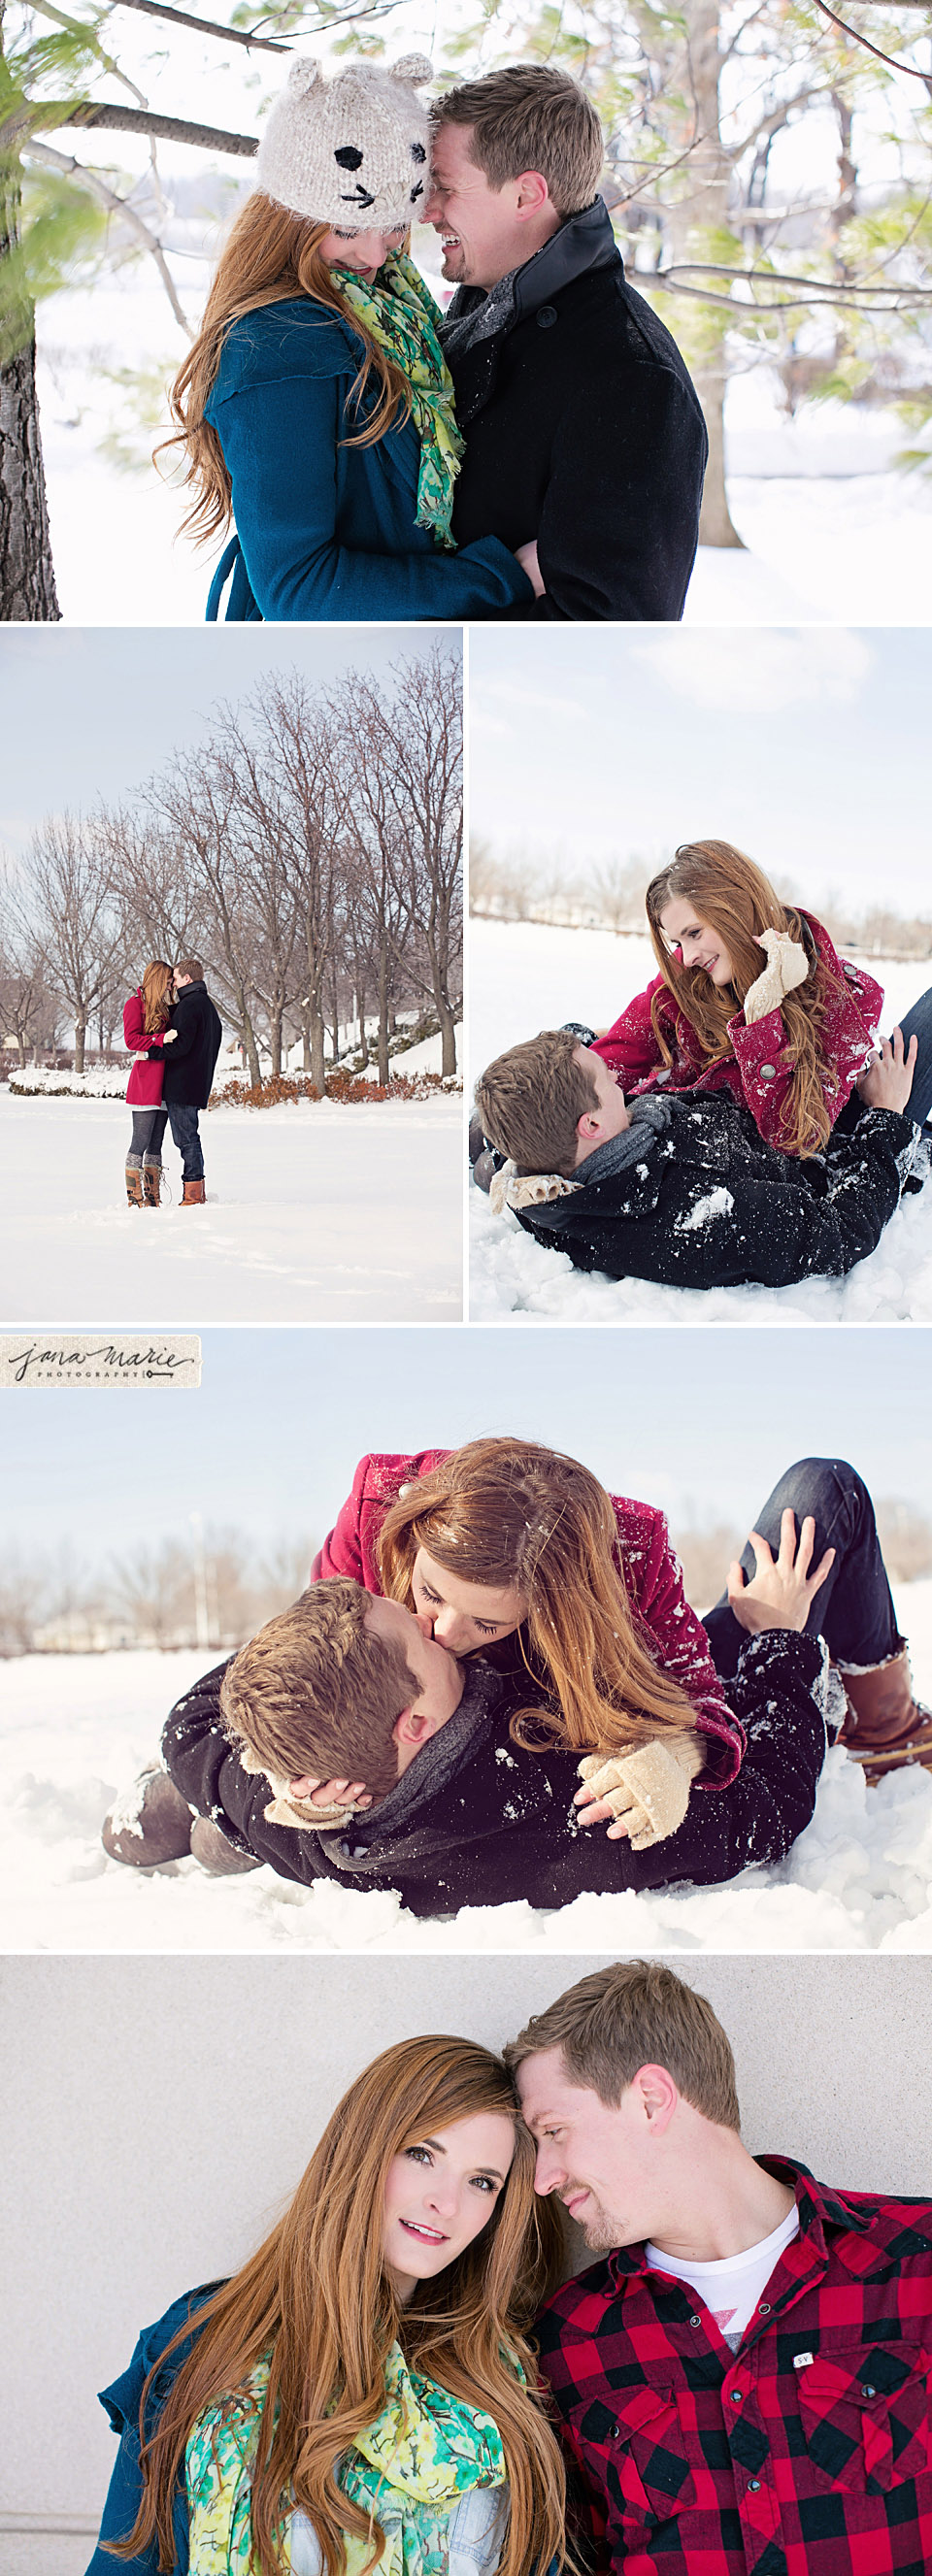 winter photography, Jana Marler, snow storms, Community of Christ temple, couples, Beloved